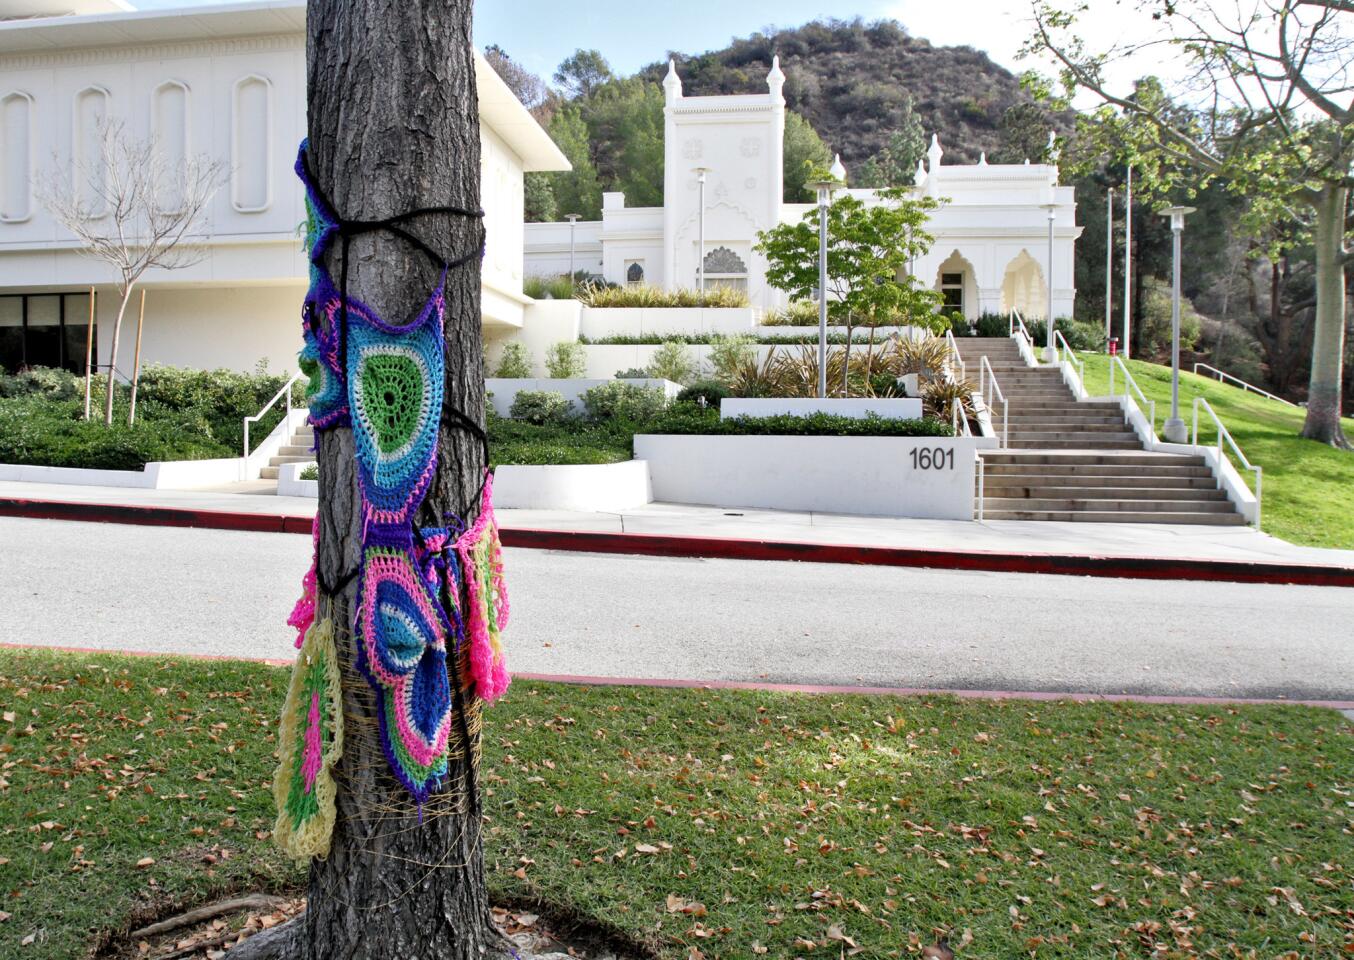 The Brand Library has recently been yarn bombed, as the knit graffiti movement calls it, as seen in Glendale on Thursday, December 24, 2015. Yarn decor appeared on some of the trees, light stands and pillars at the historic landmark.